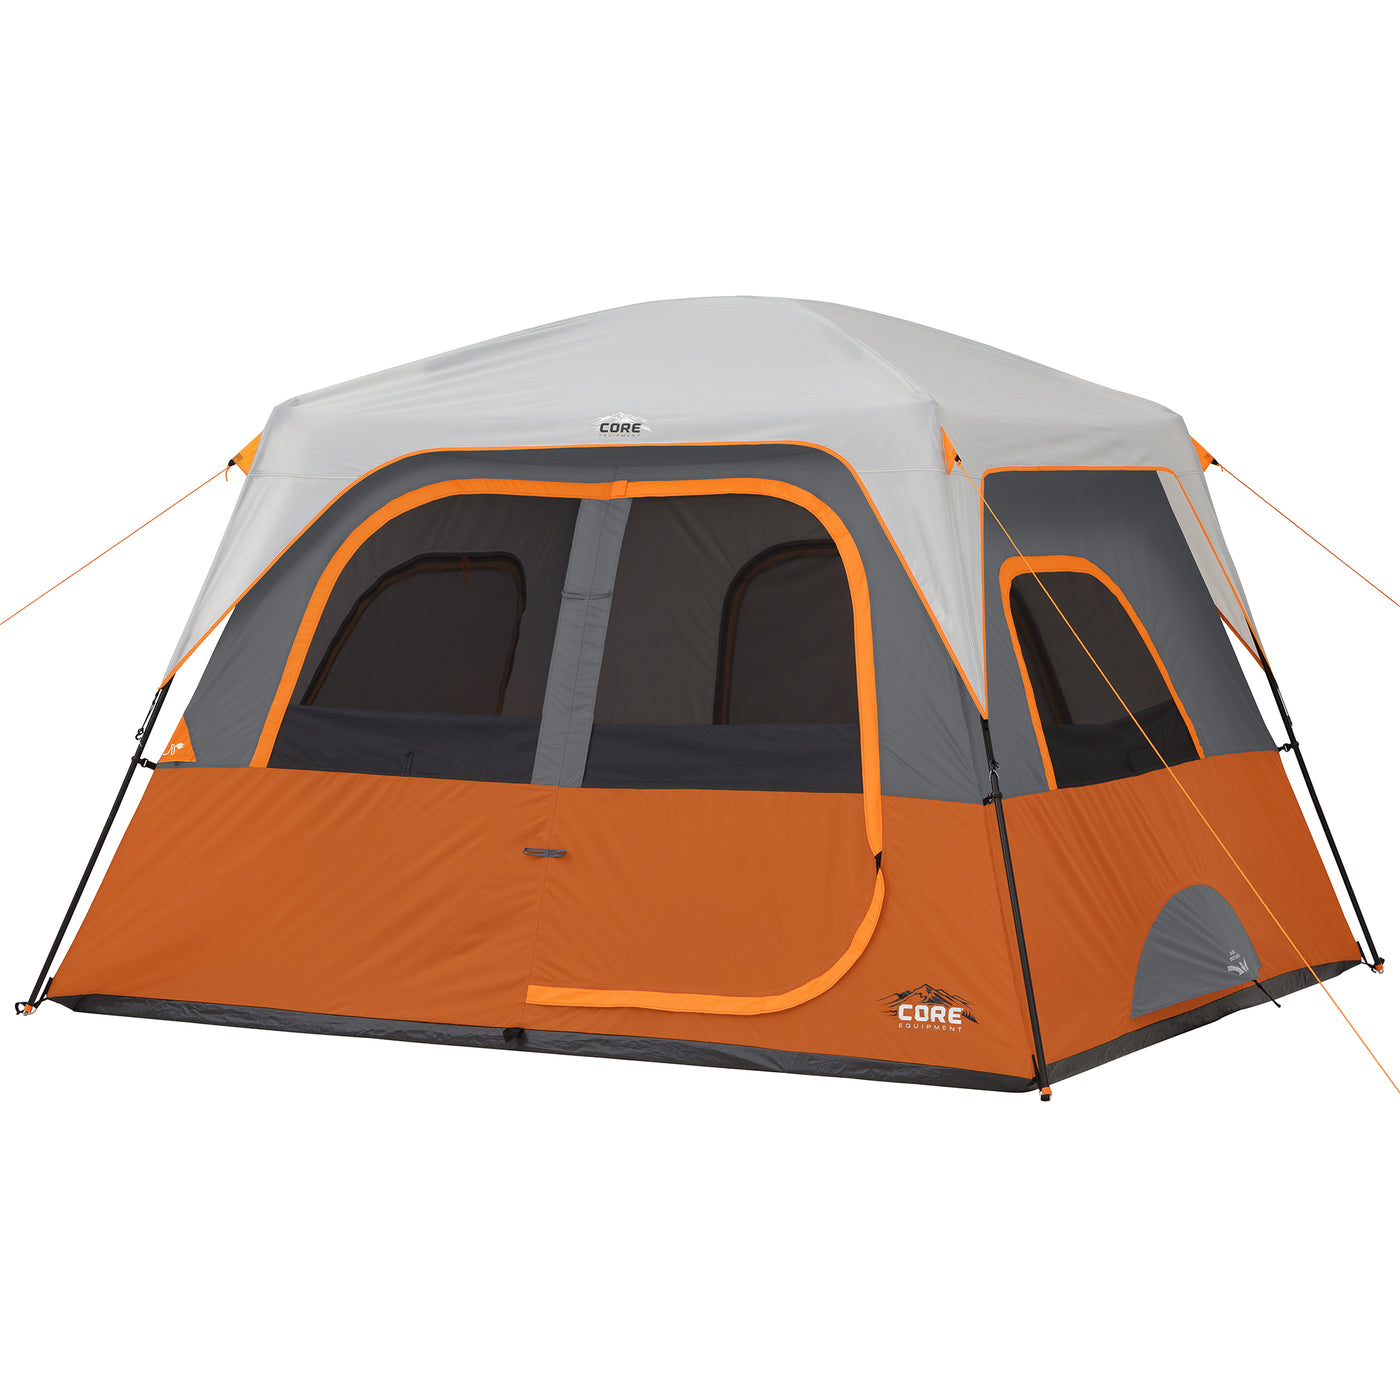 Hero image of 6 person straight wall cabin tent